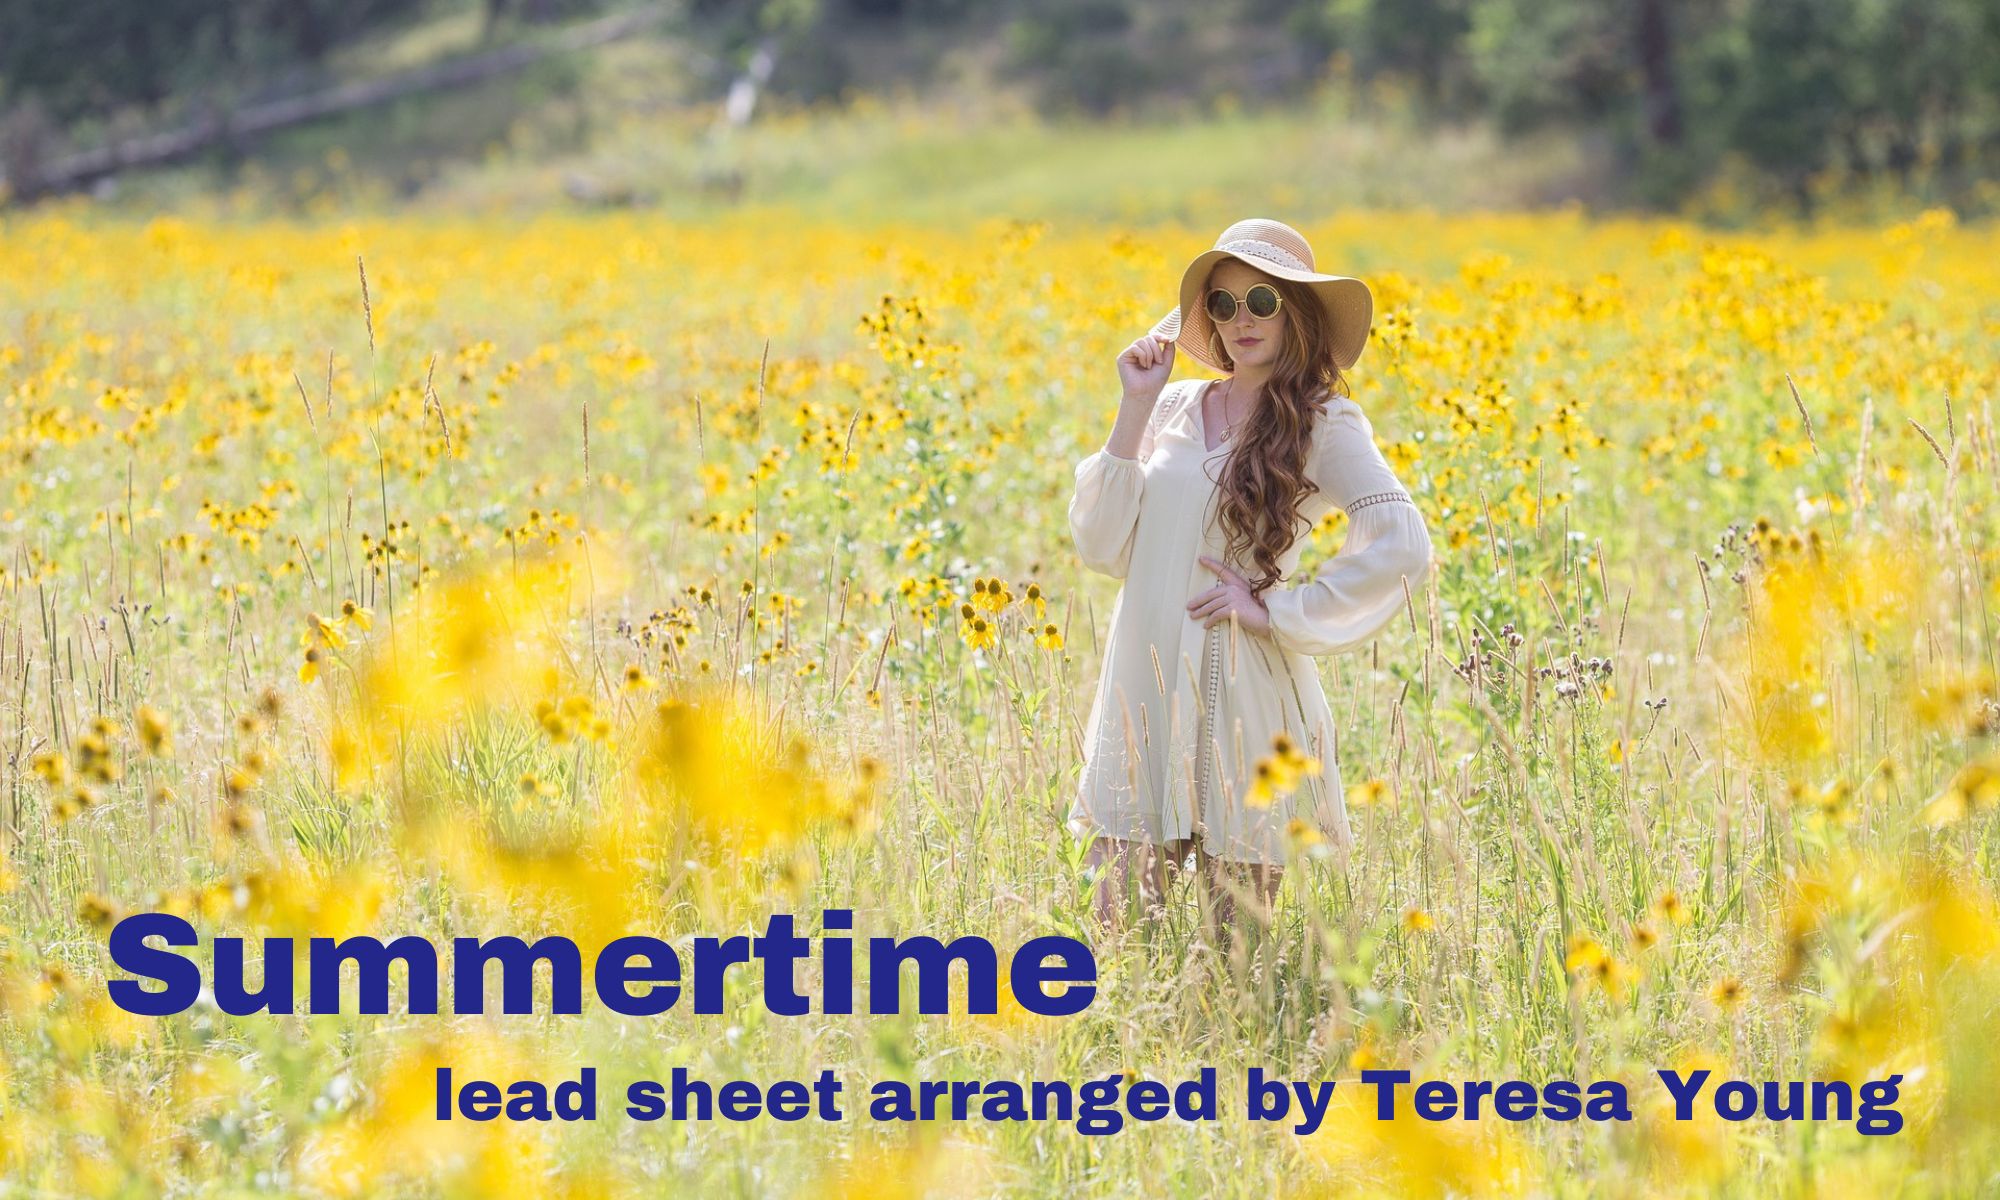 Summertime lead sheet arr. by Teresa Young